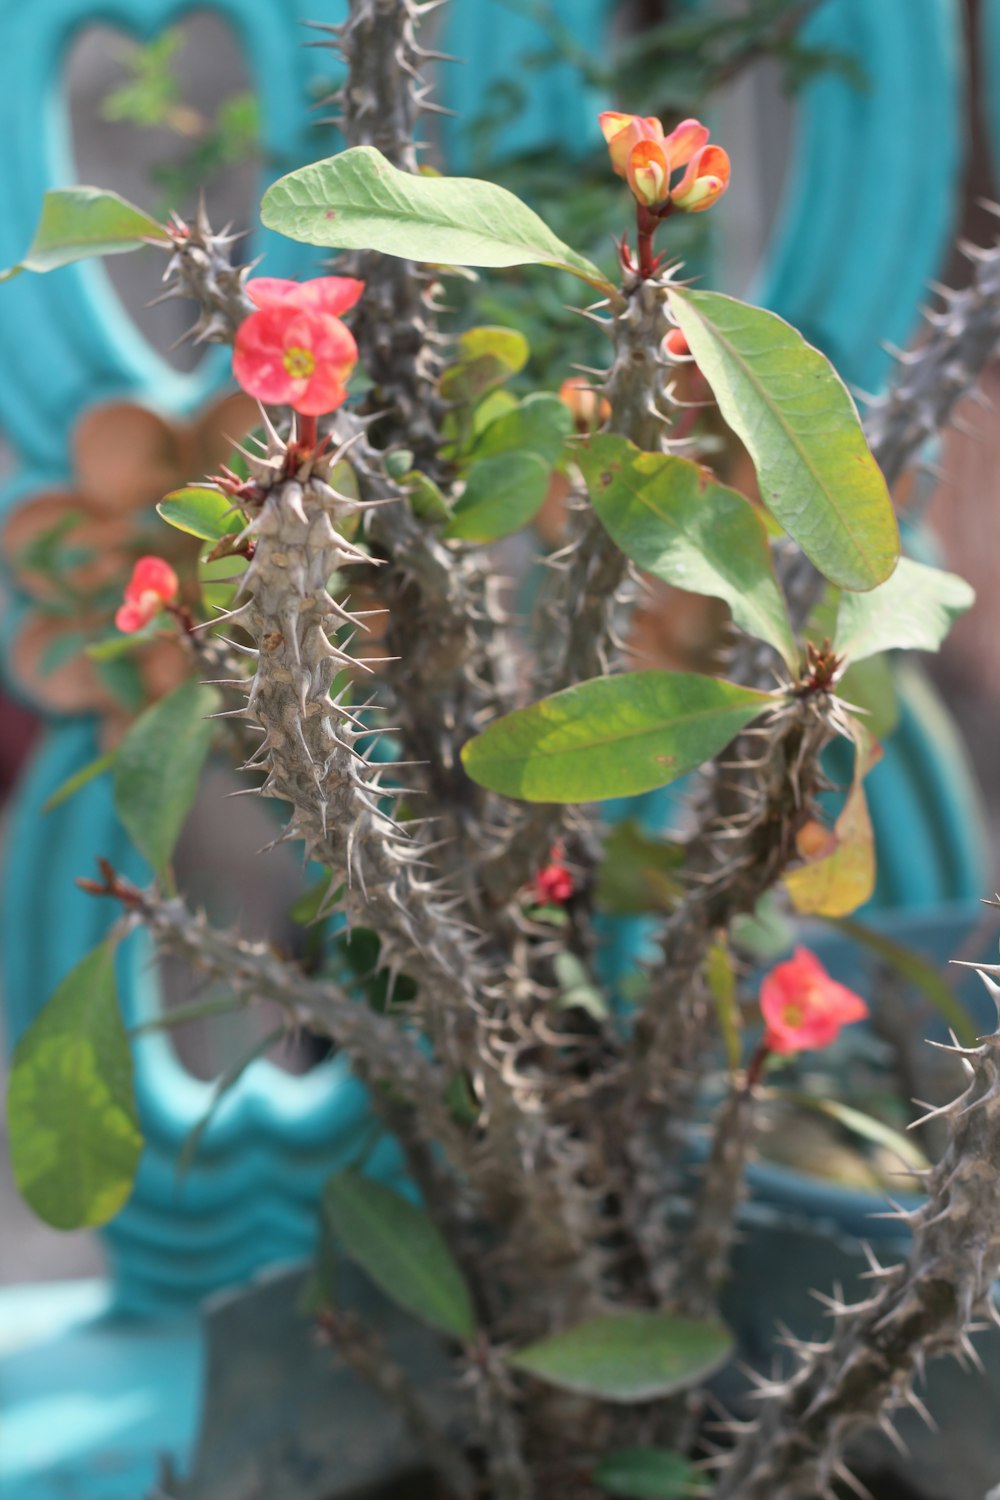 a potted plant with red flowers and green leaves